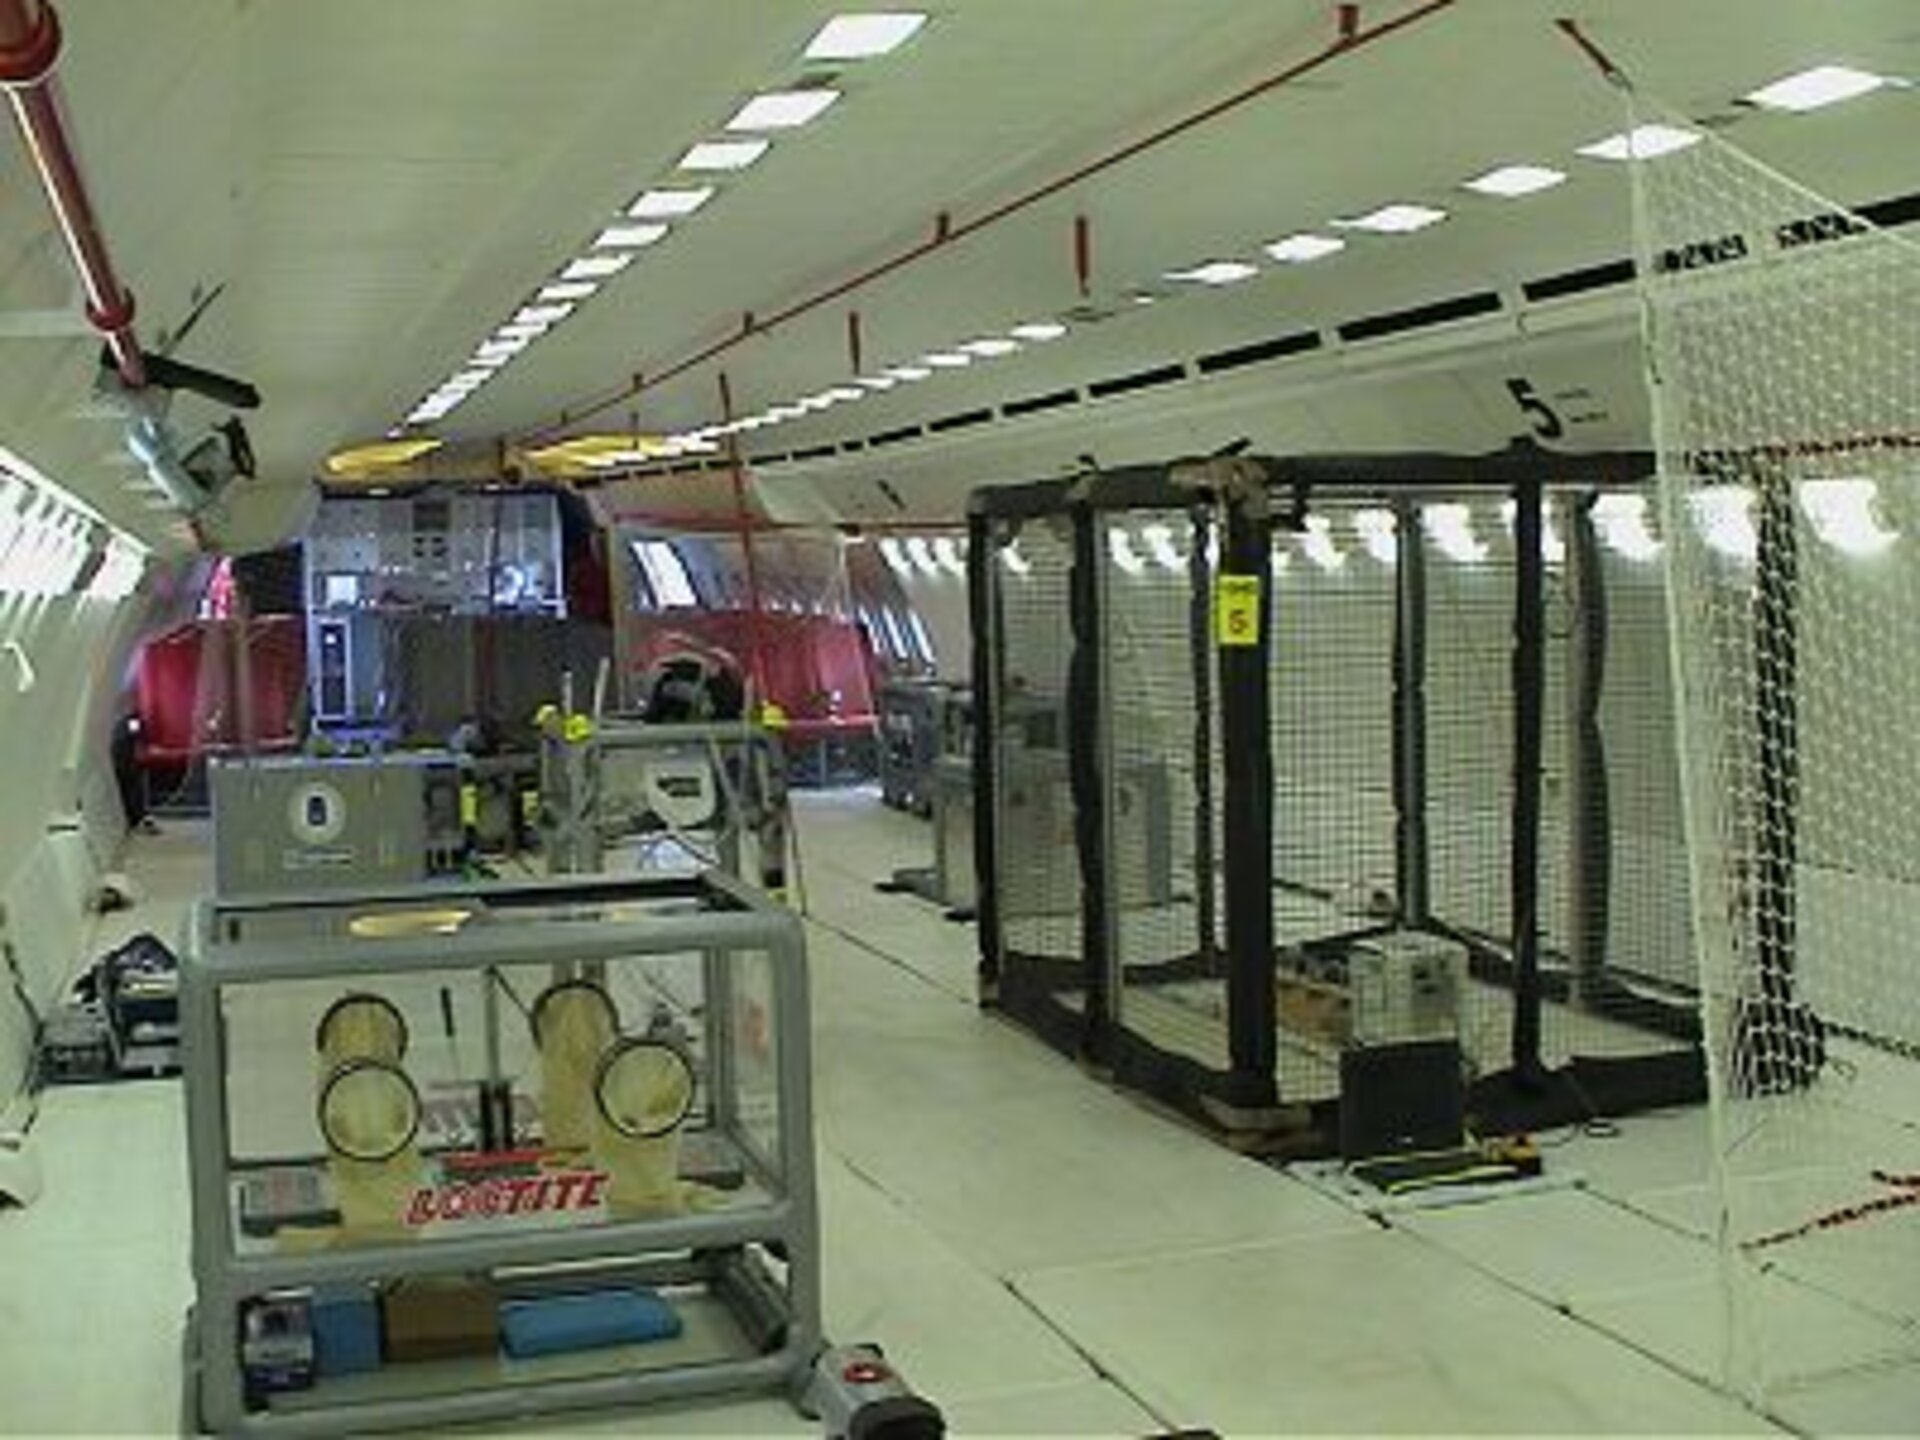 The experiment area inside the specially adapted Airbus A-300